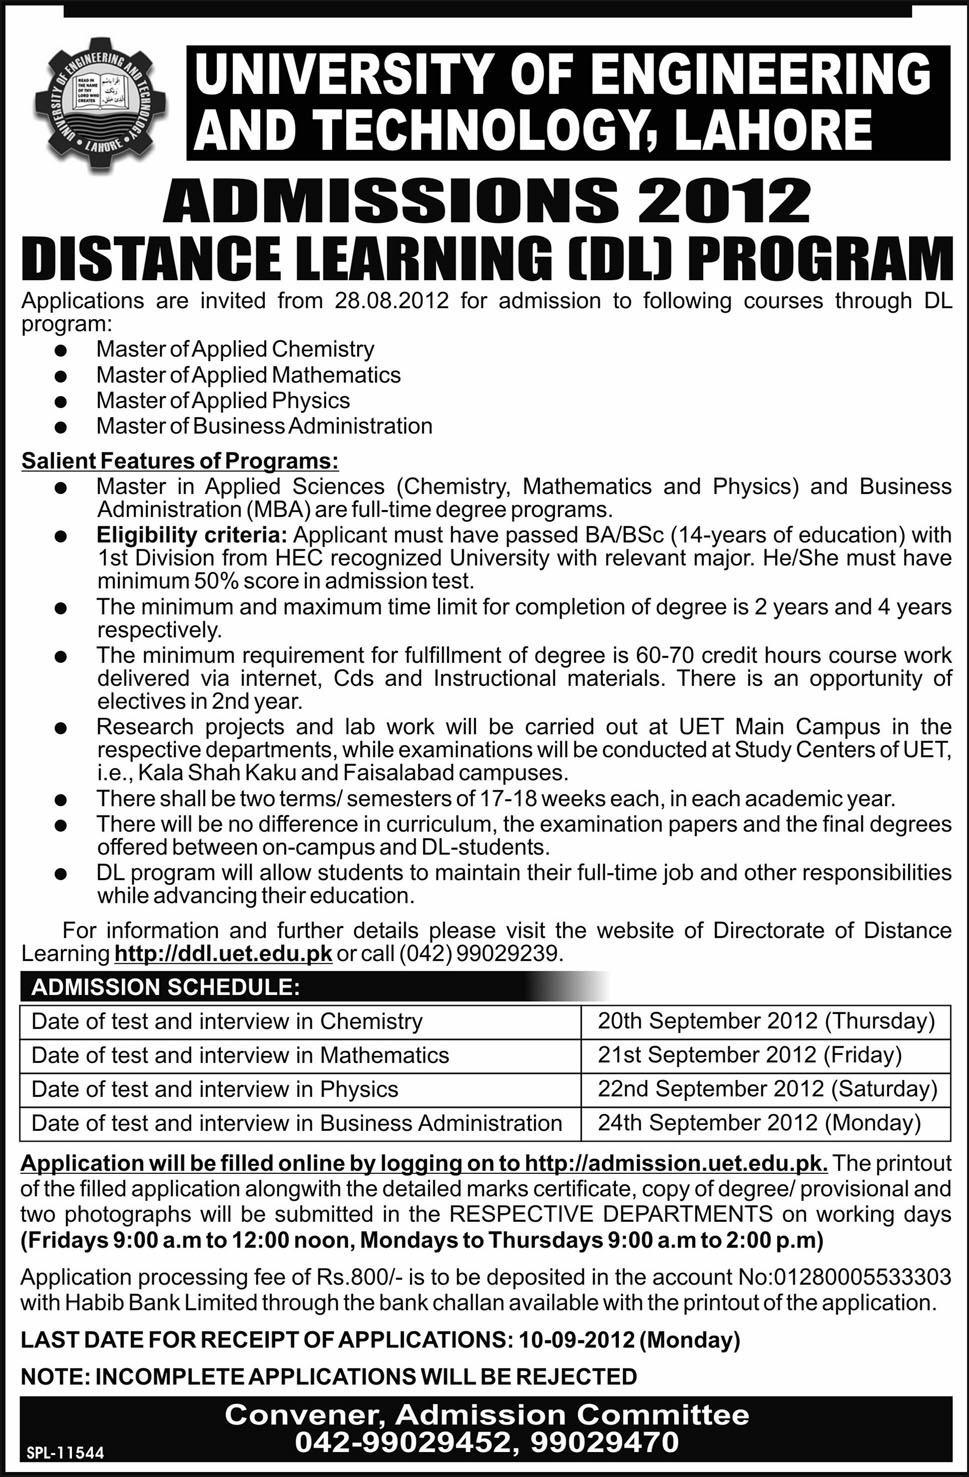 Distance Learning(Dl) Program Uet Lahore Admissions 2012